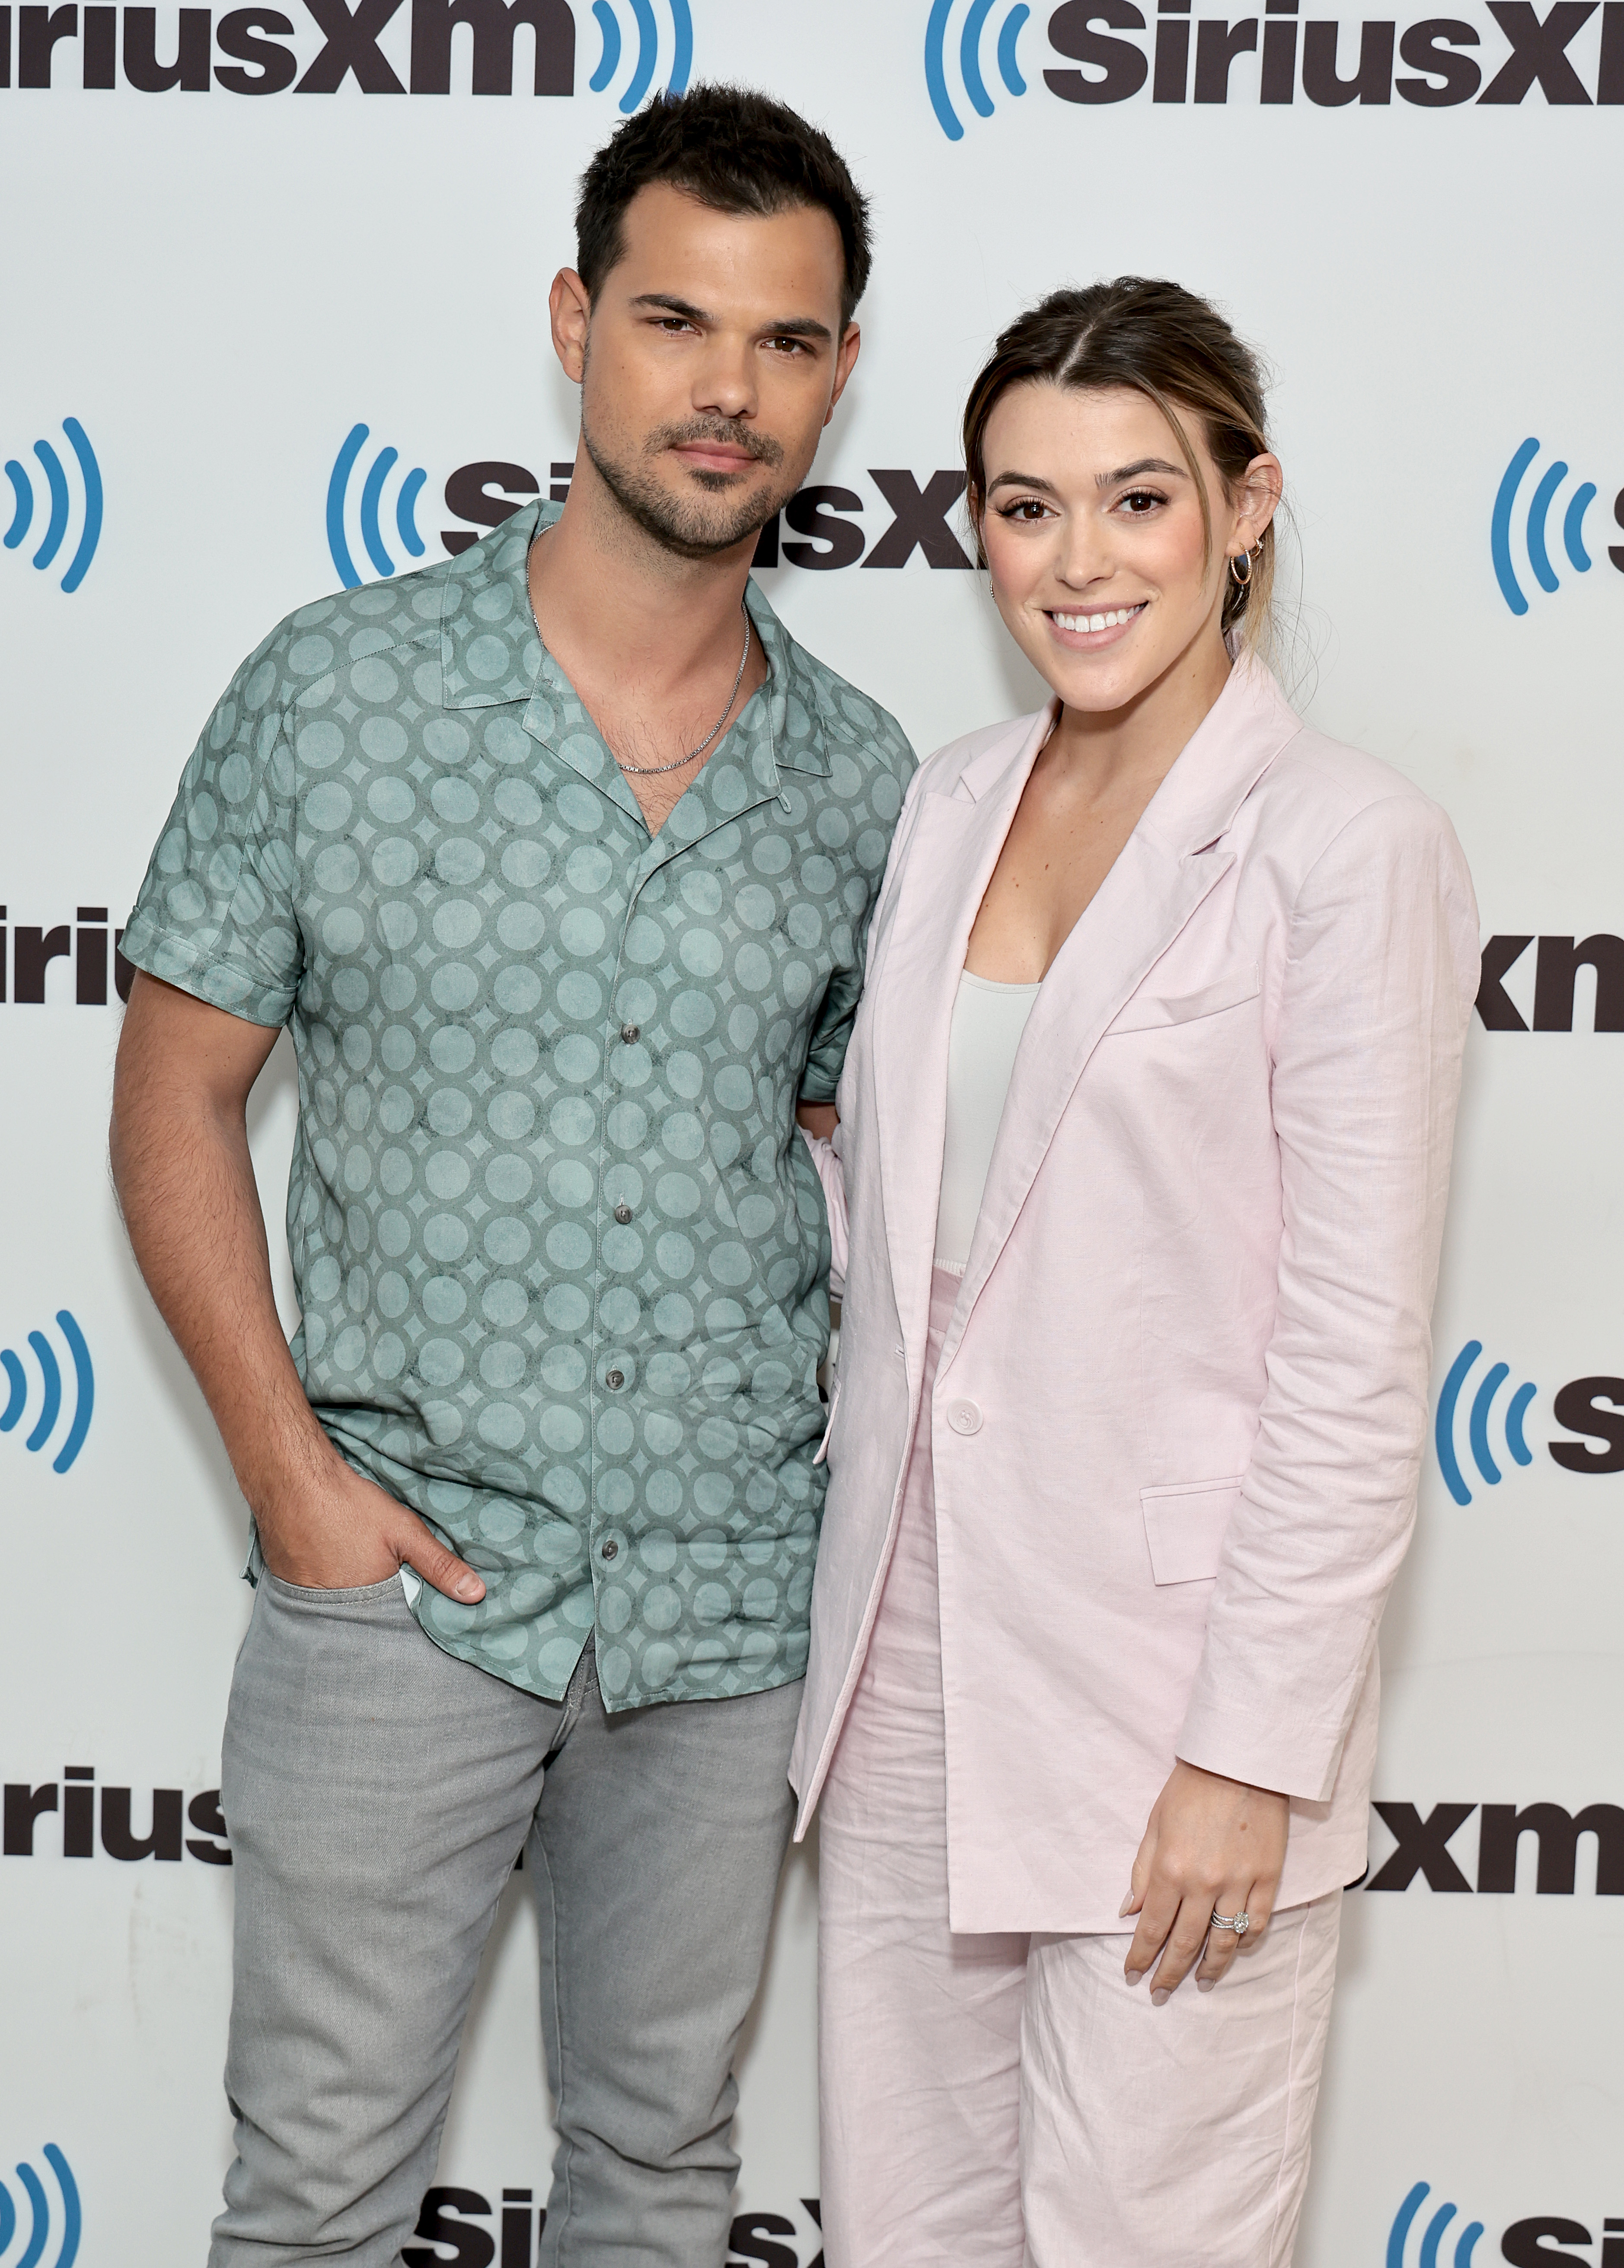 Lautner and Tay at a media event